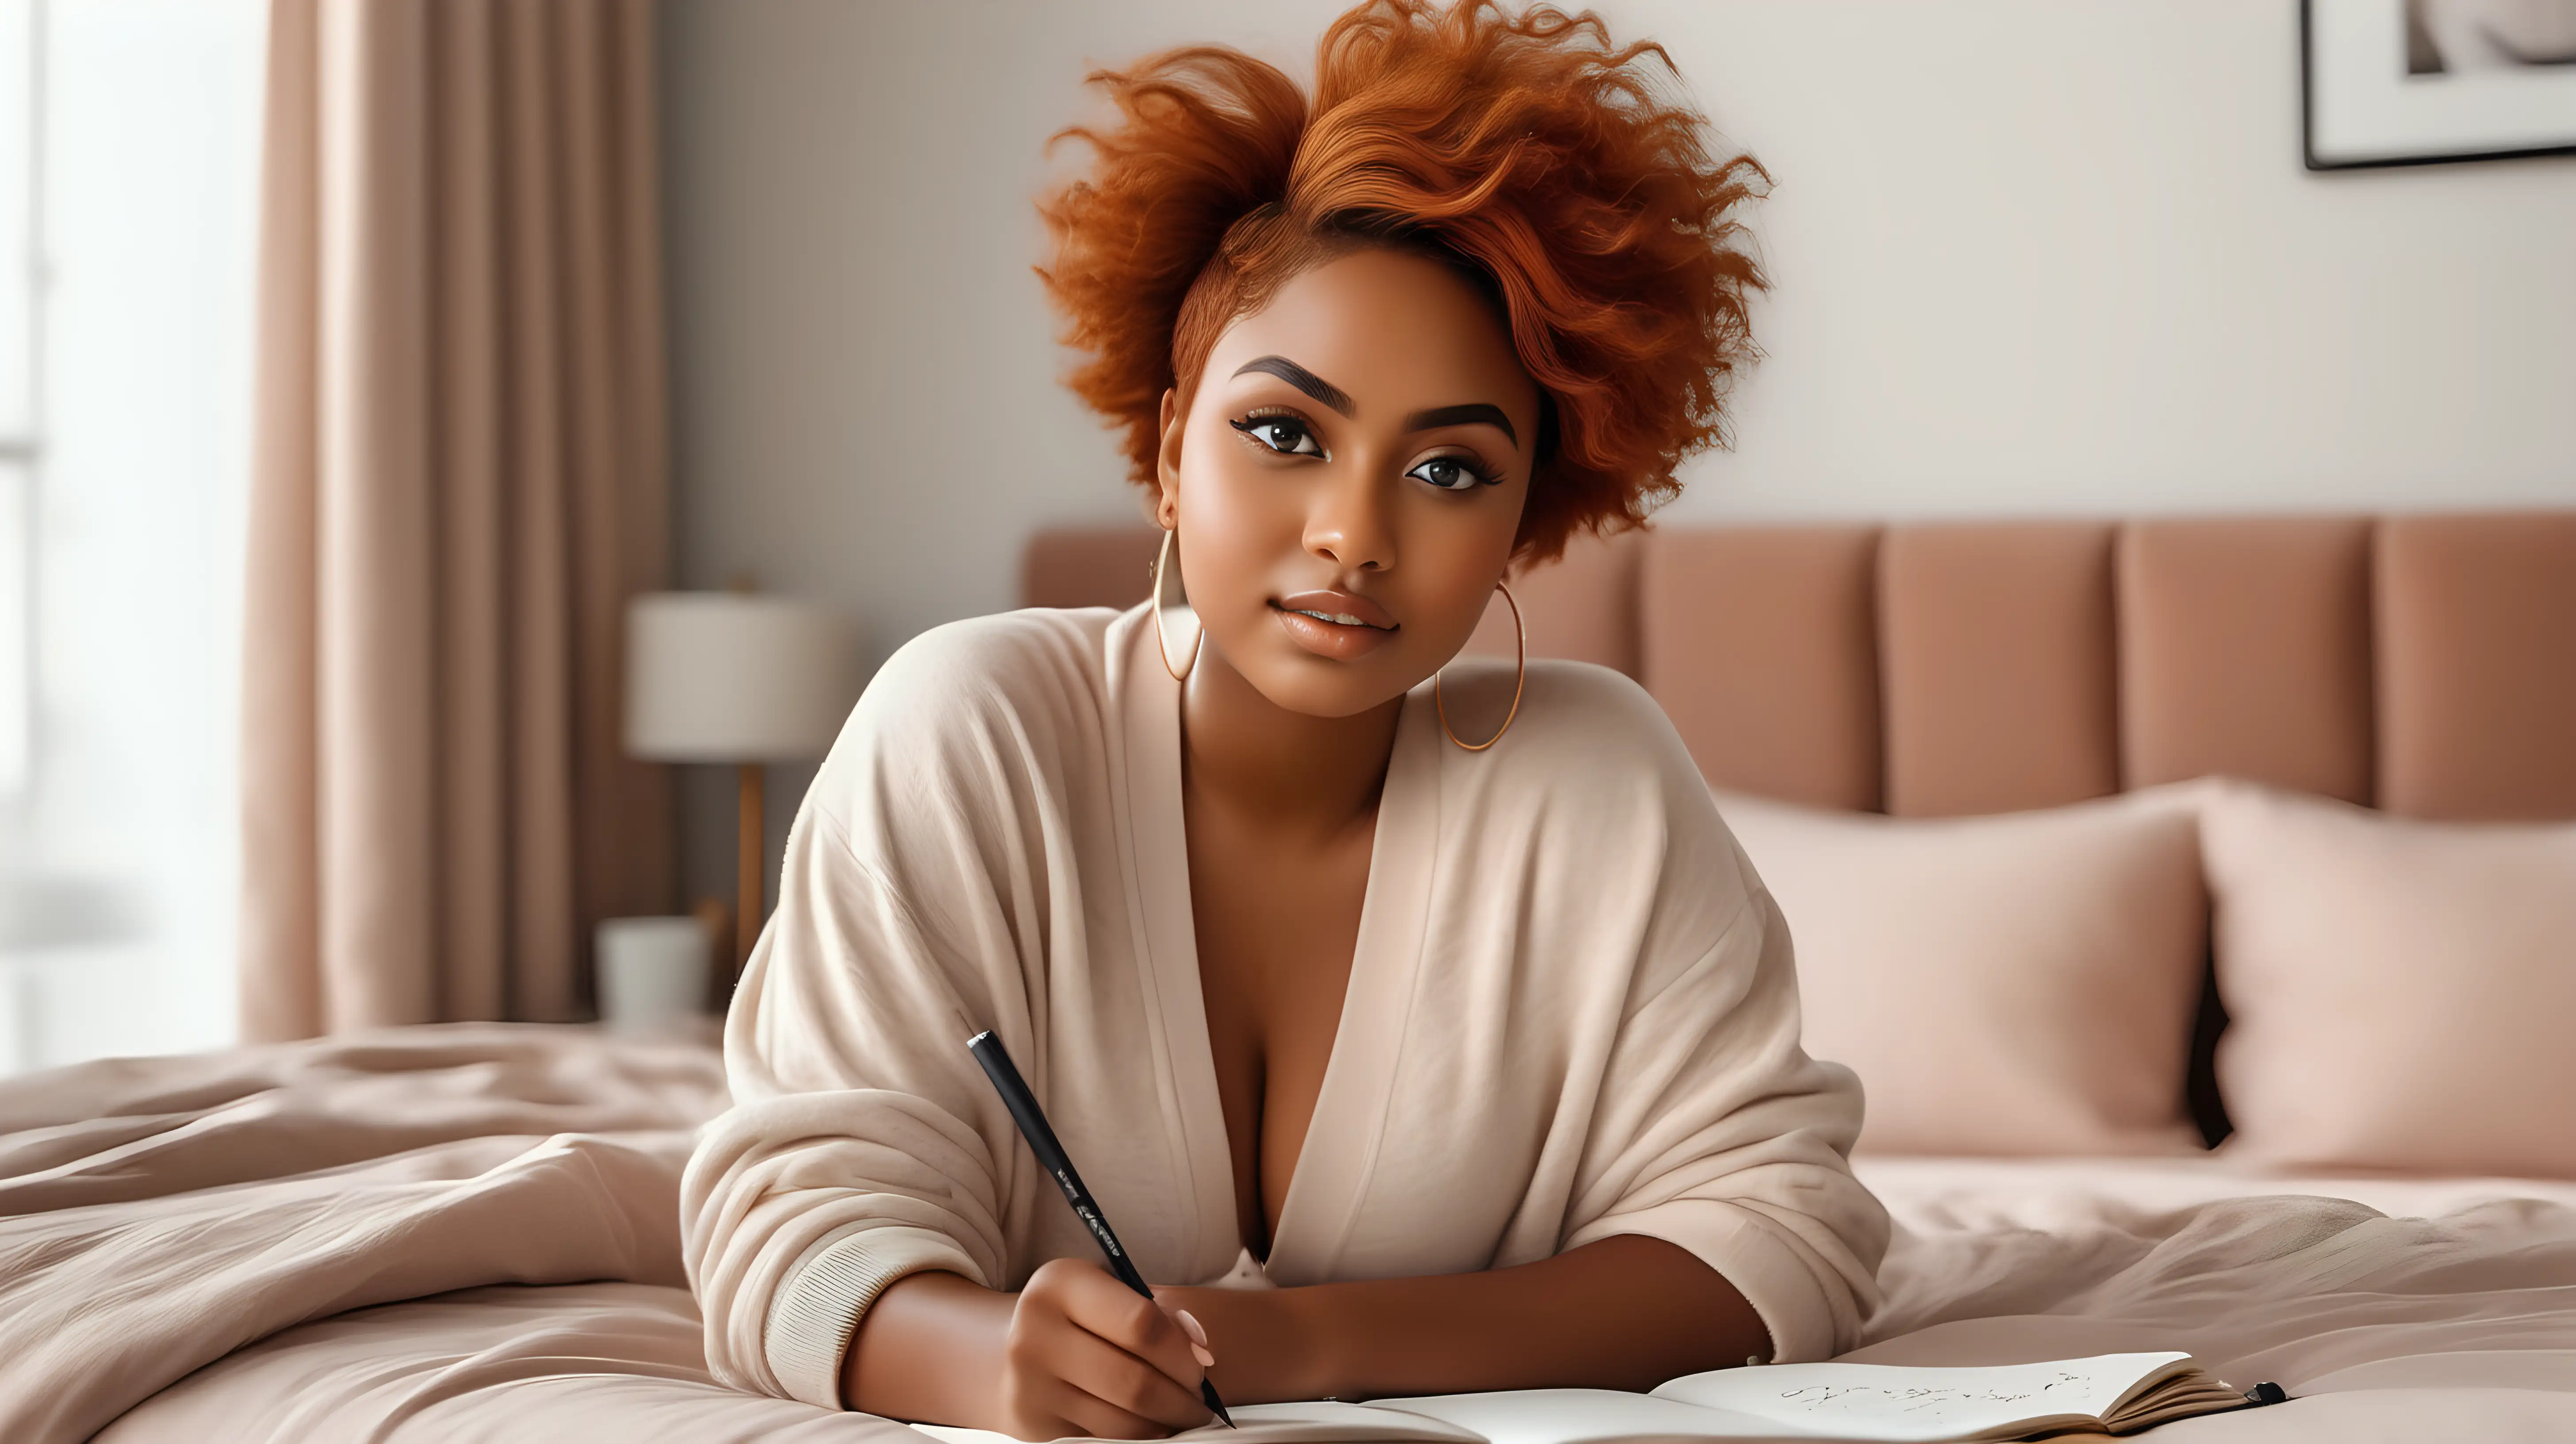 A beautiful, curvy, medium dark skin woman with large expressive eyes and long lush eyelashes giving a soft, engaging look.  Her hair is styled in a short copper pixie cut.  She is wearing large hoop earrings, which ad a touch of elegance to her cozy attire. The woman is clad in Fashion loungewear.  She is sitting in a luxury bedroom on her bed with a journal in her lap and pin her hand, writing her goals for 2024..